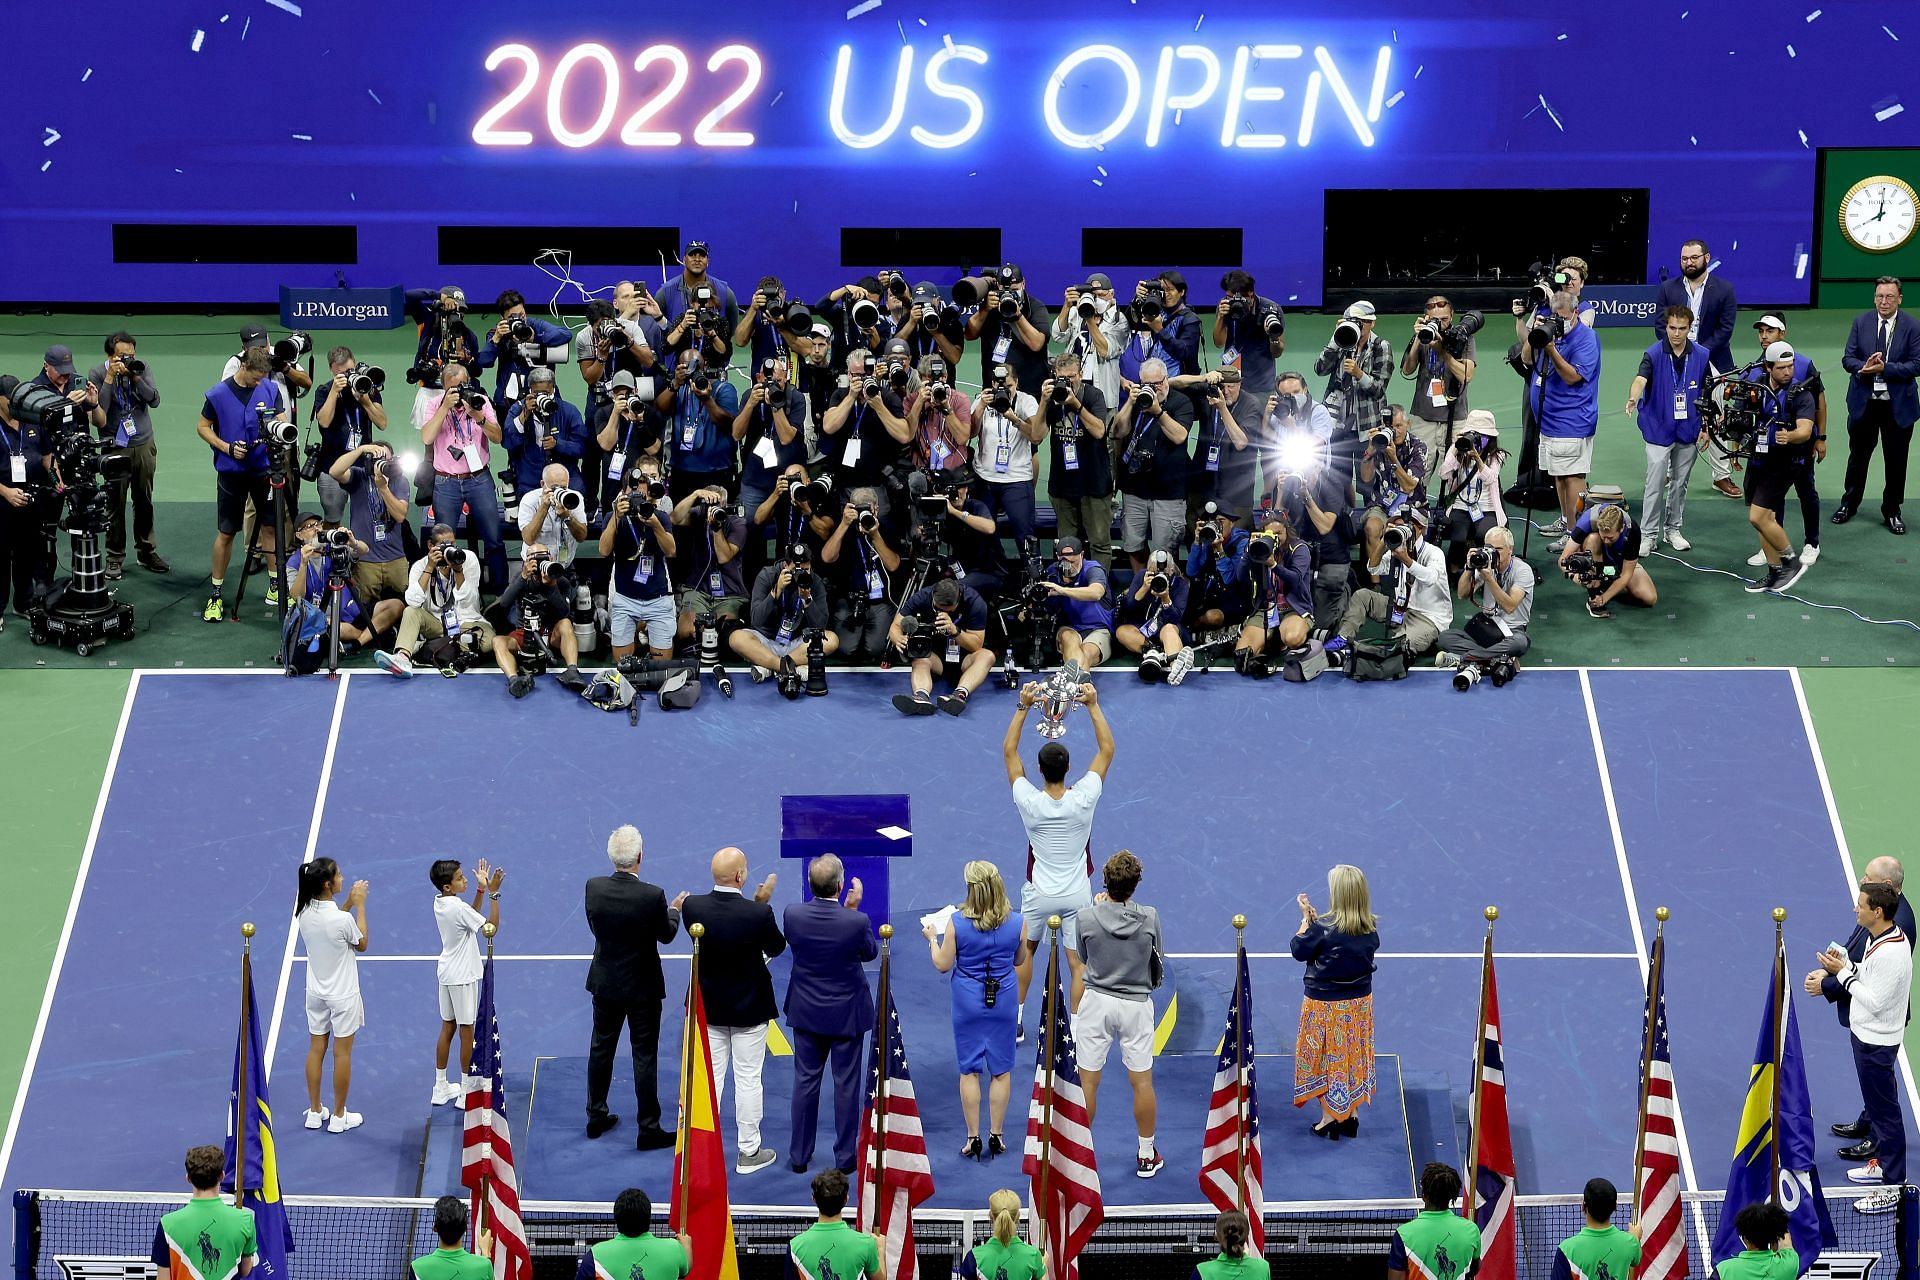 The US Open drew record numbers.